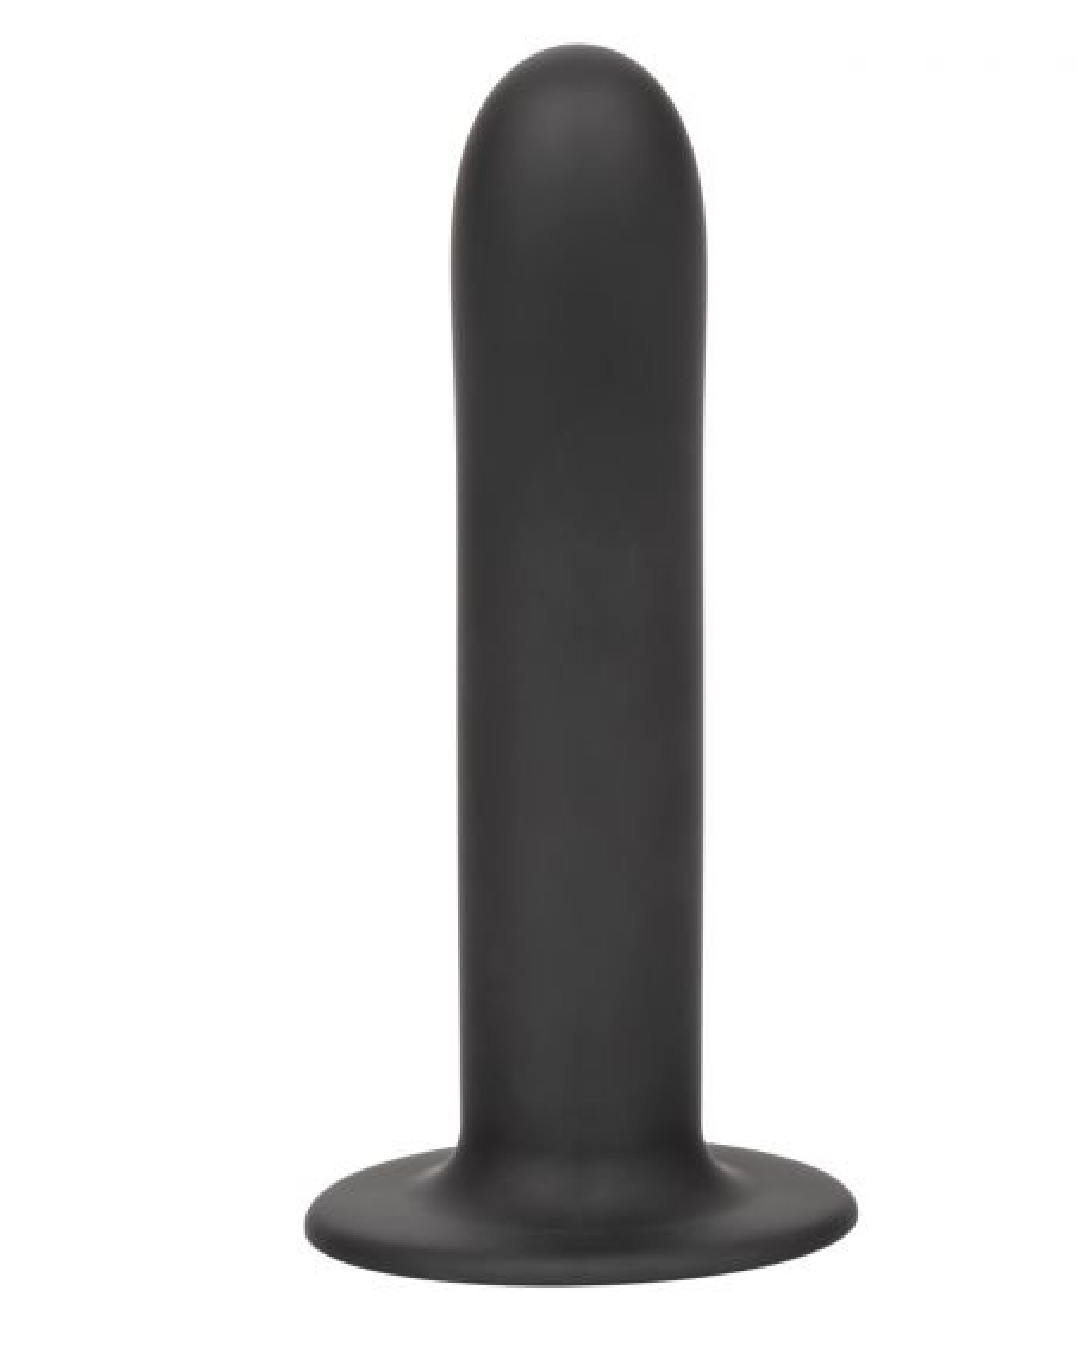 Boundless 7 Inch Smooth Silicone Dildo - Black upright on a white background to show the smooth shaft